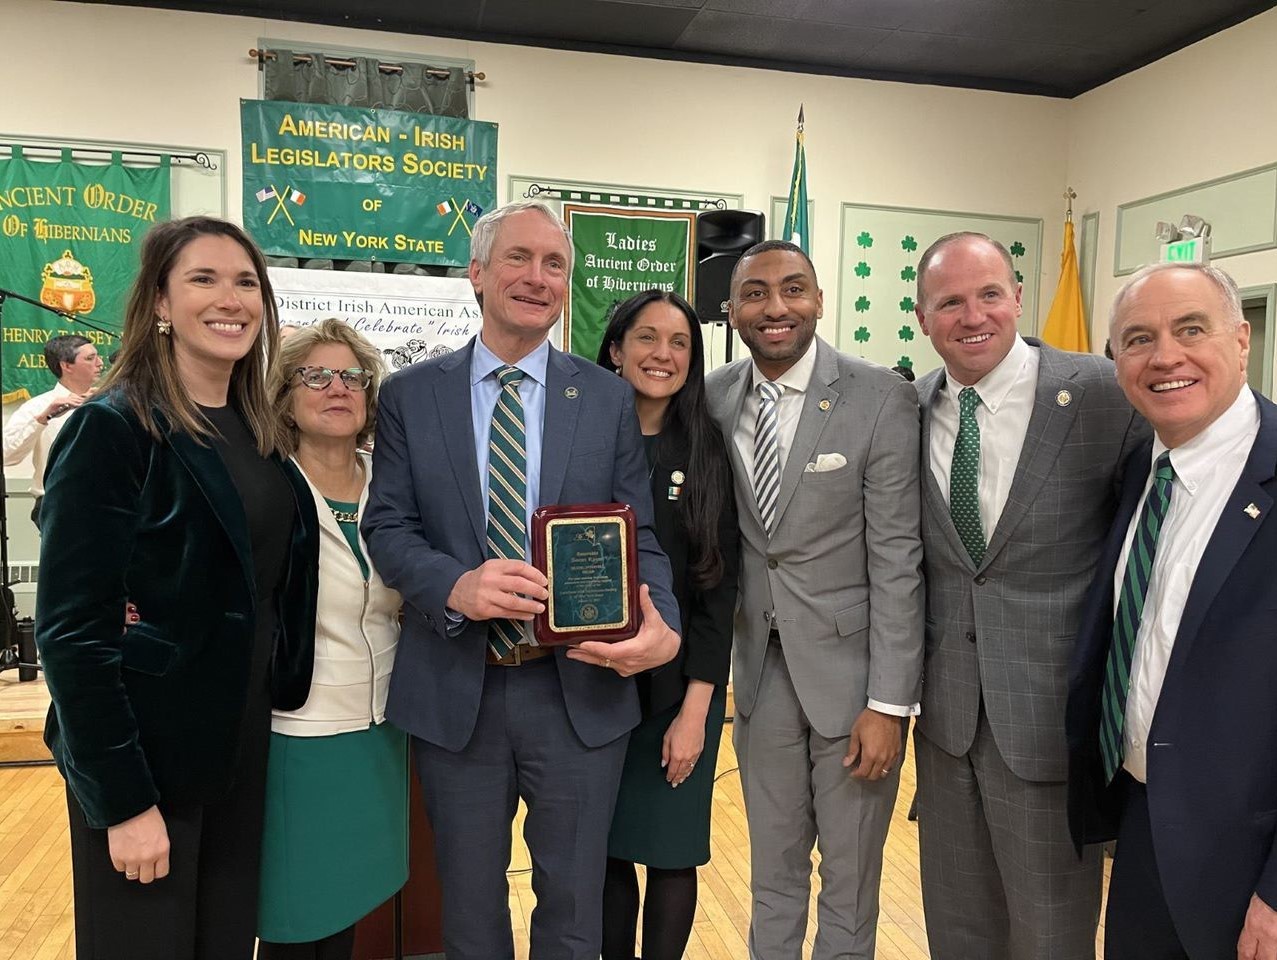 New York State Sen. Sean Ryan poses with New York State Sens. Michelle Hinchey, Shelley Mayer, Jessica Scarcella-Spanton, Jamaal Bailey and Tim Kennedy, as well as New York State Comptroller Thomas DiNapoli. (Submitted)